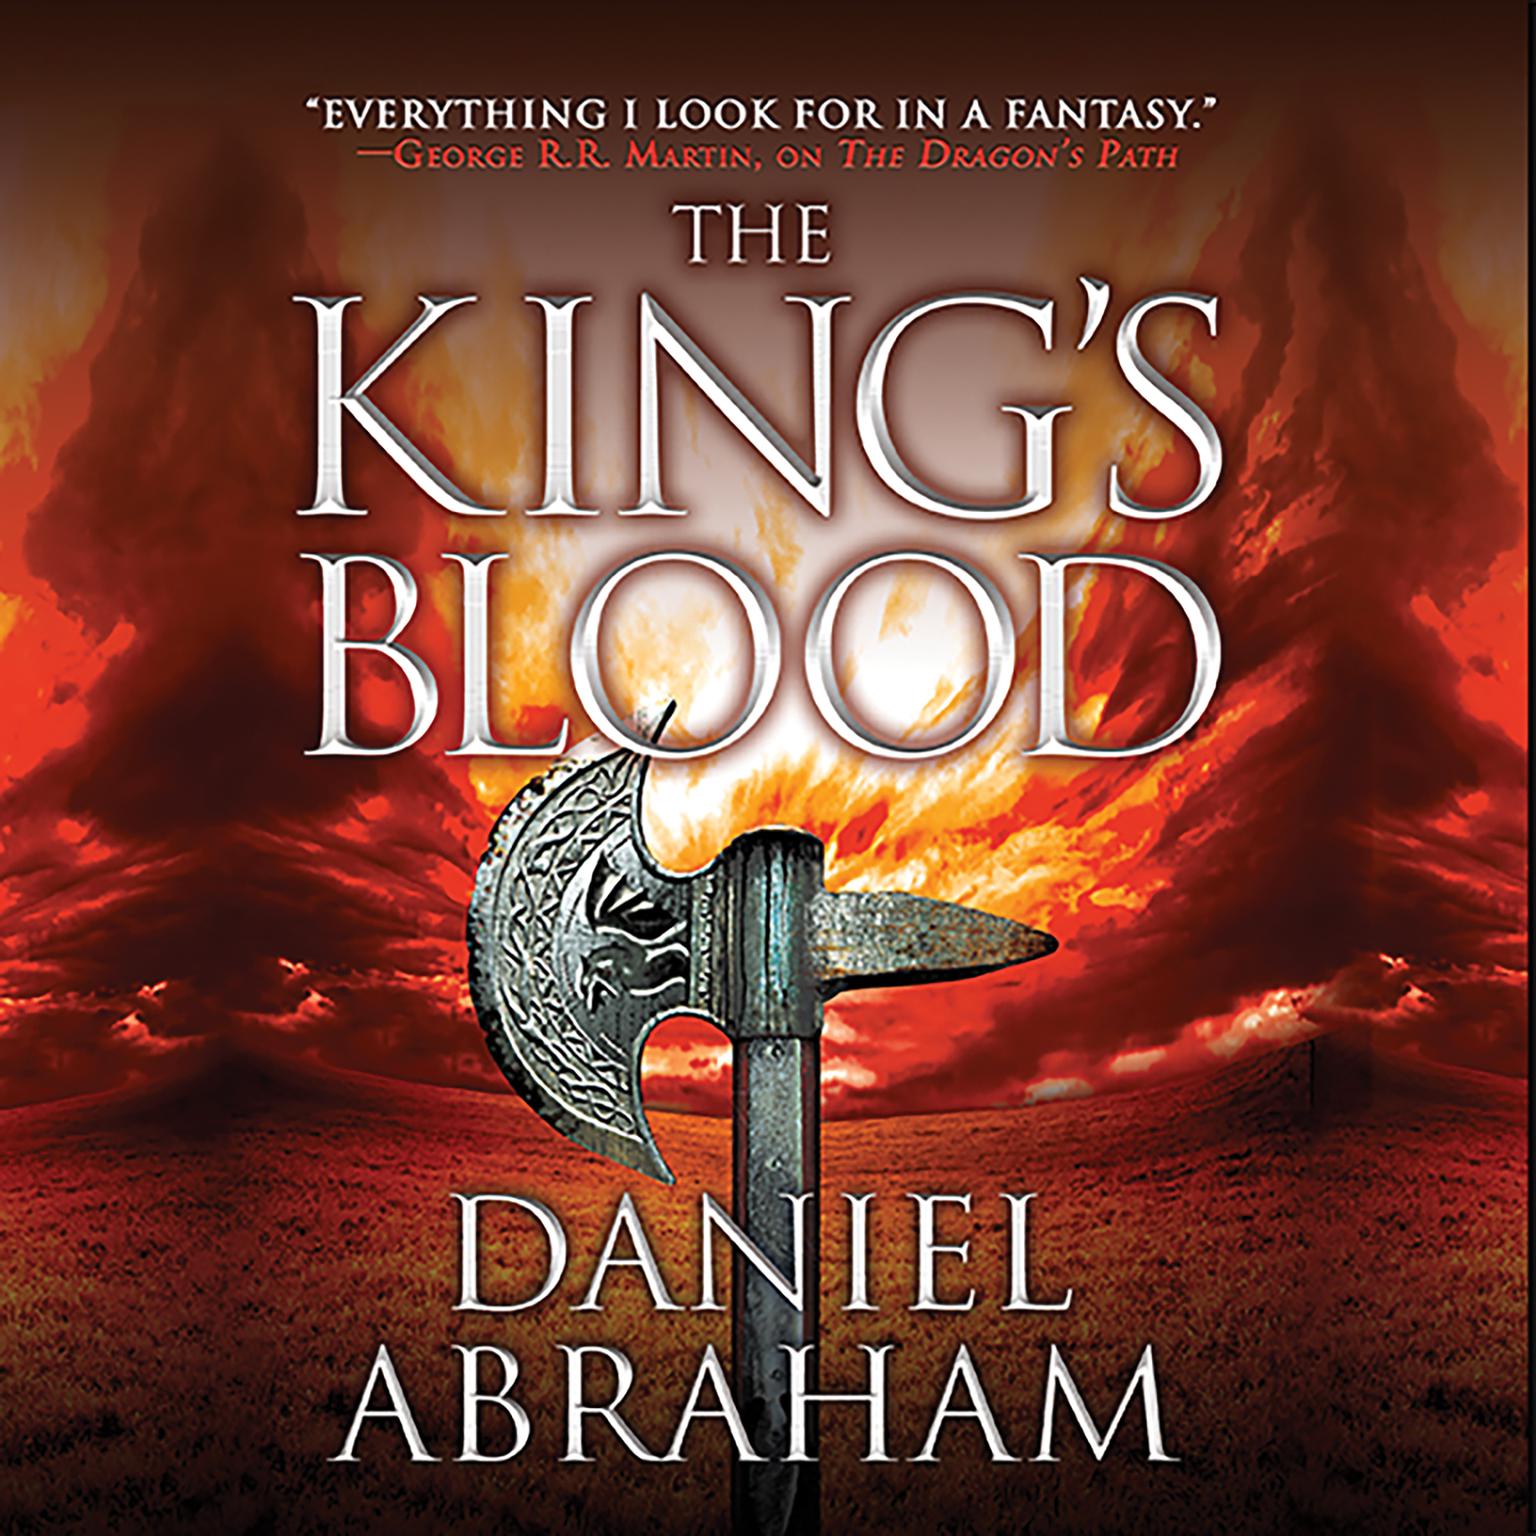 The Kings Blood Audiobook, by Daniel Abraham